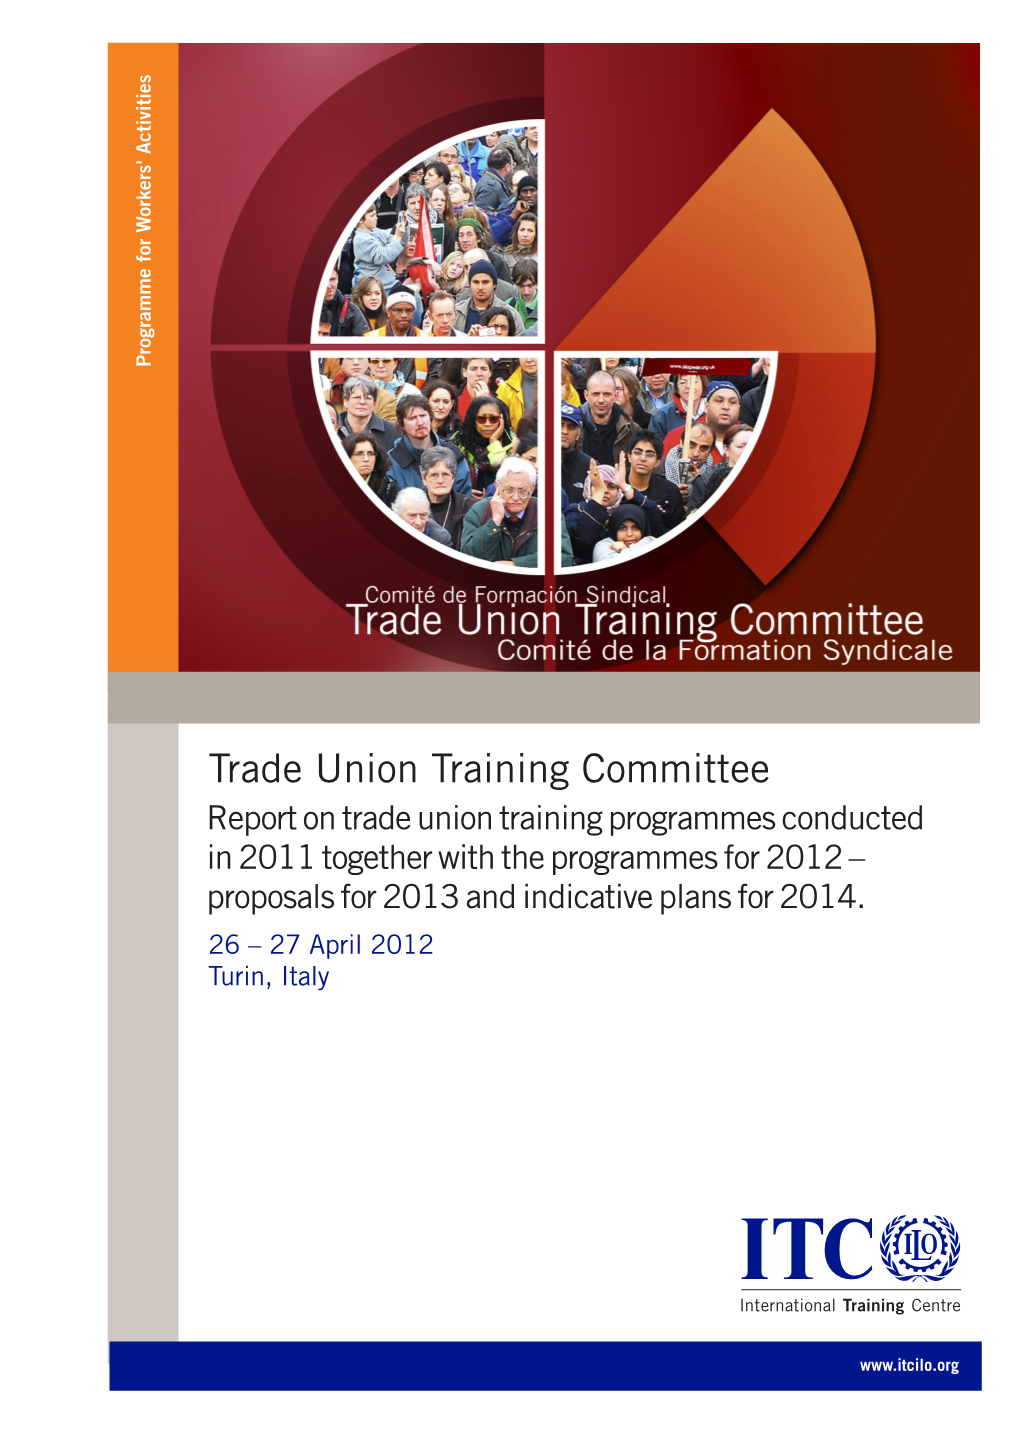 Report on Trade Union Training Programmes Conducted in 2011 Together with the Programmes for 2012 – Proposals for 2013 and Indicative Plans for 2014